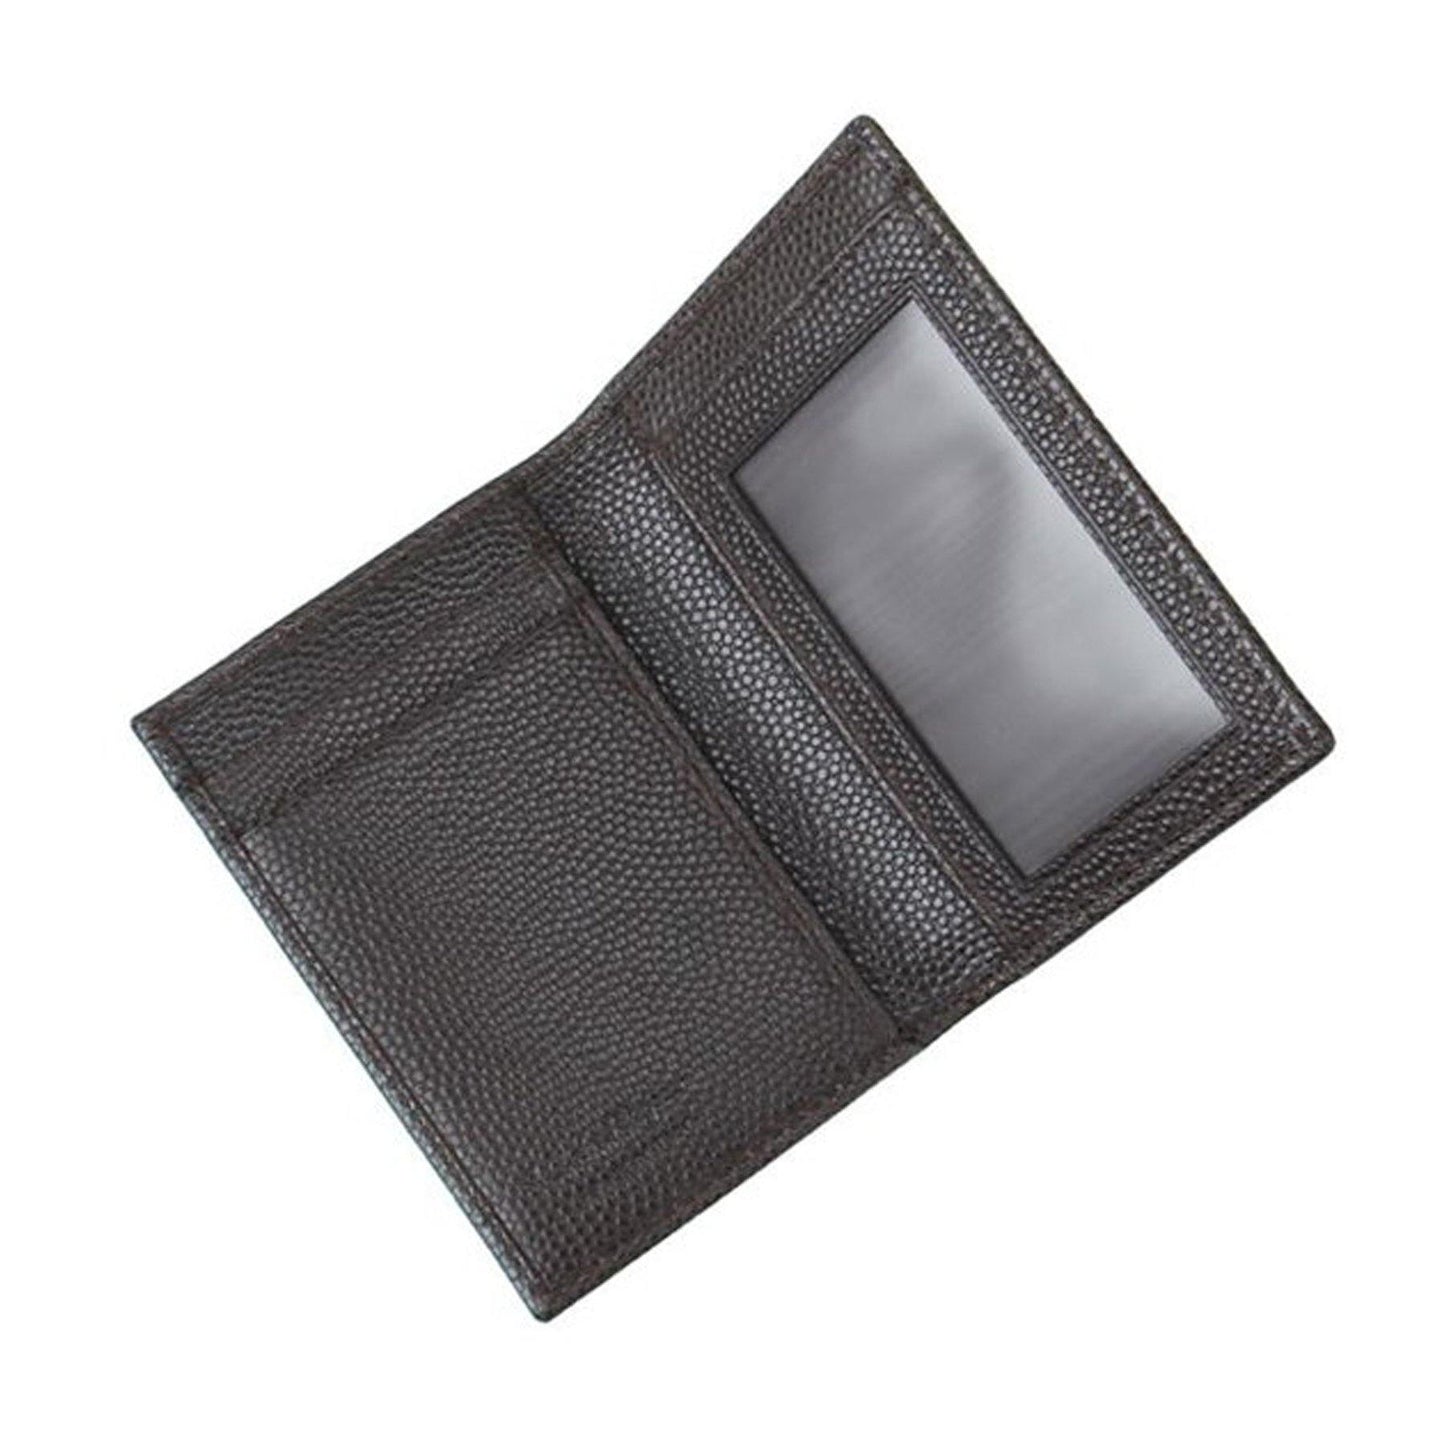 Gancini Card Holder 66 9855 - Cosmos Boutique New Jersey